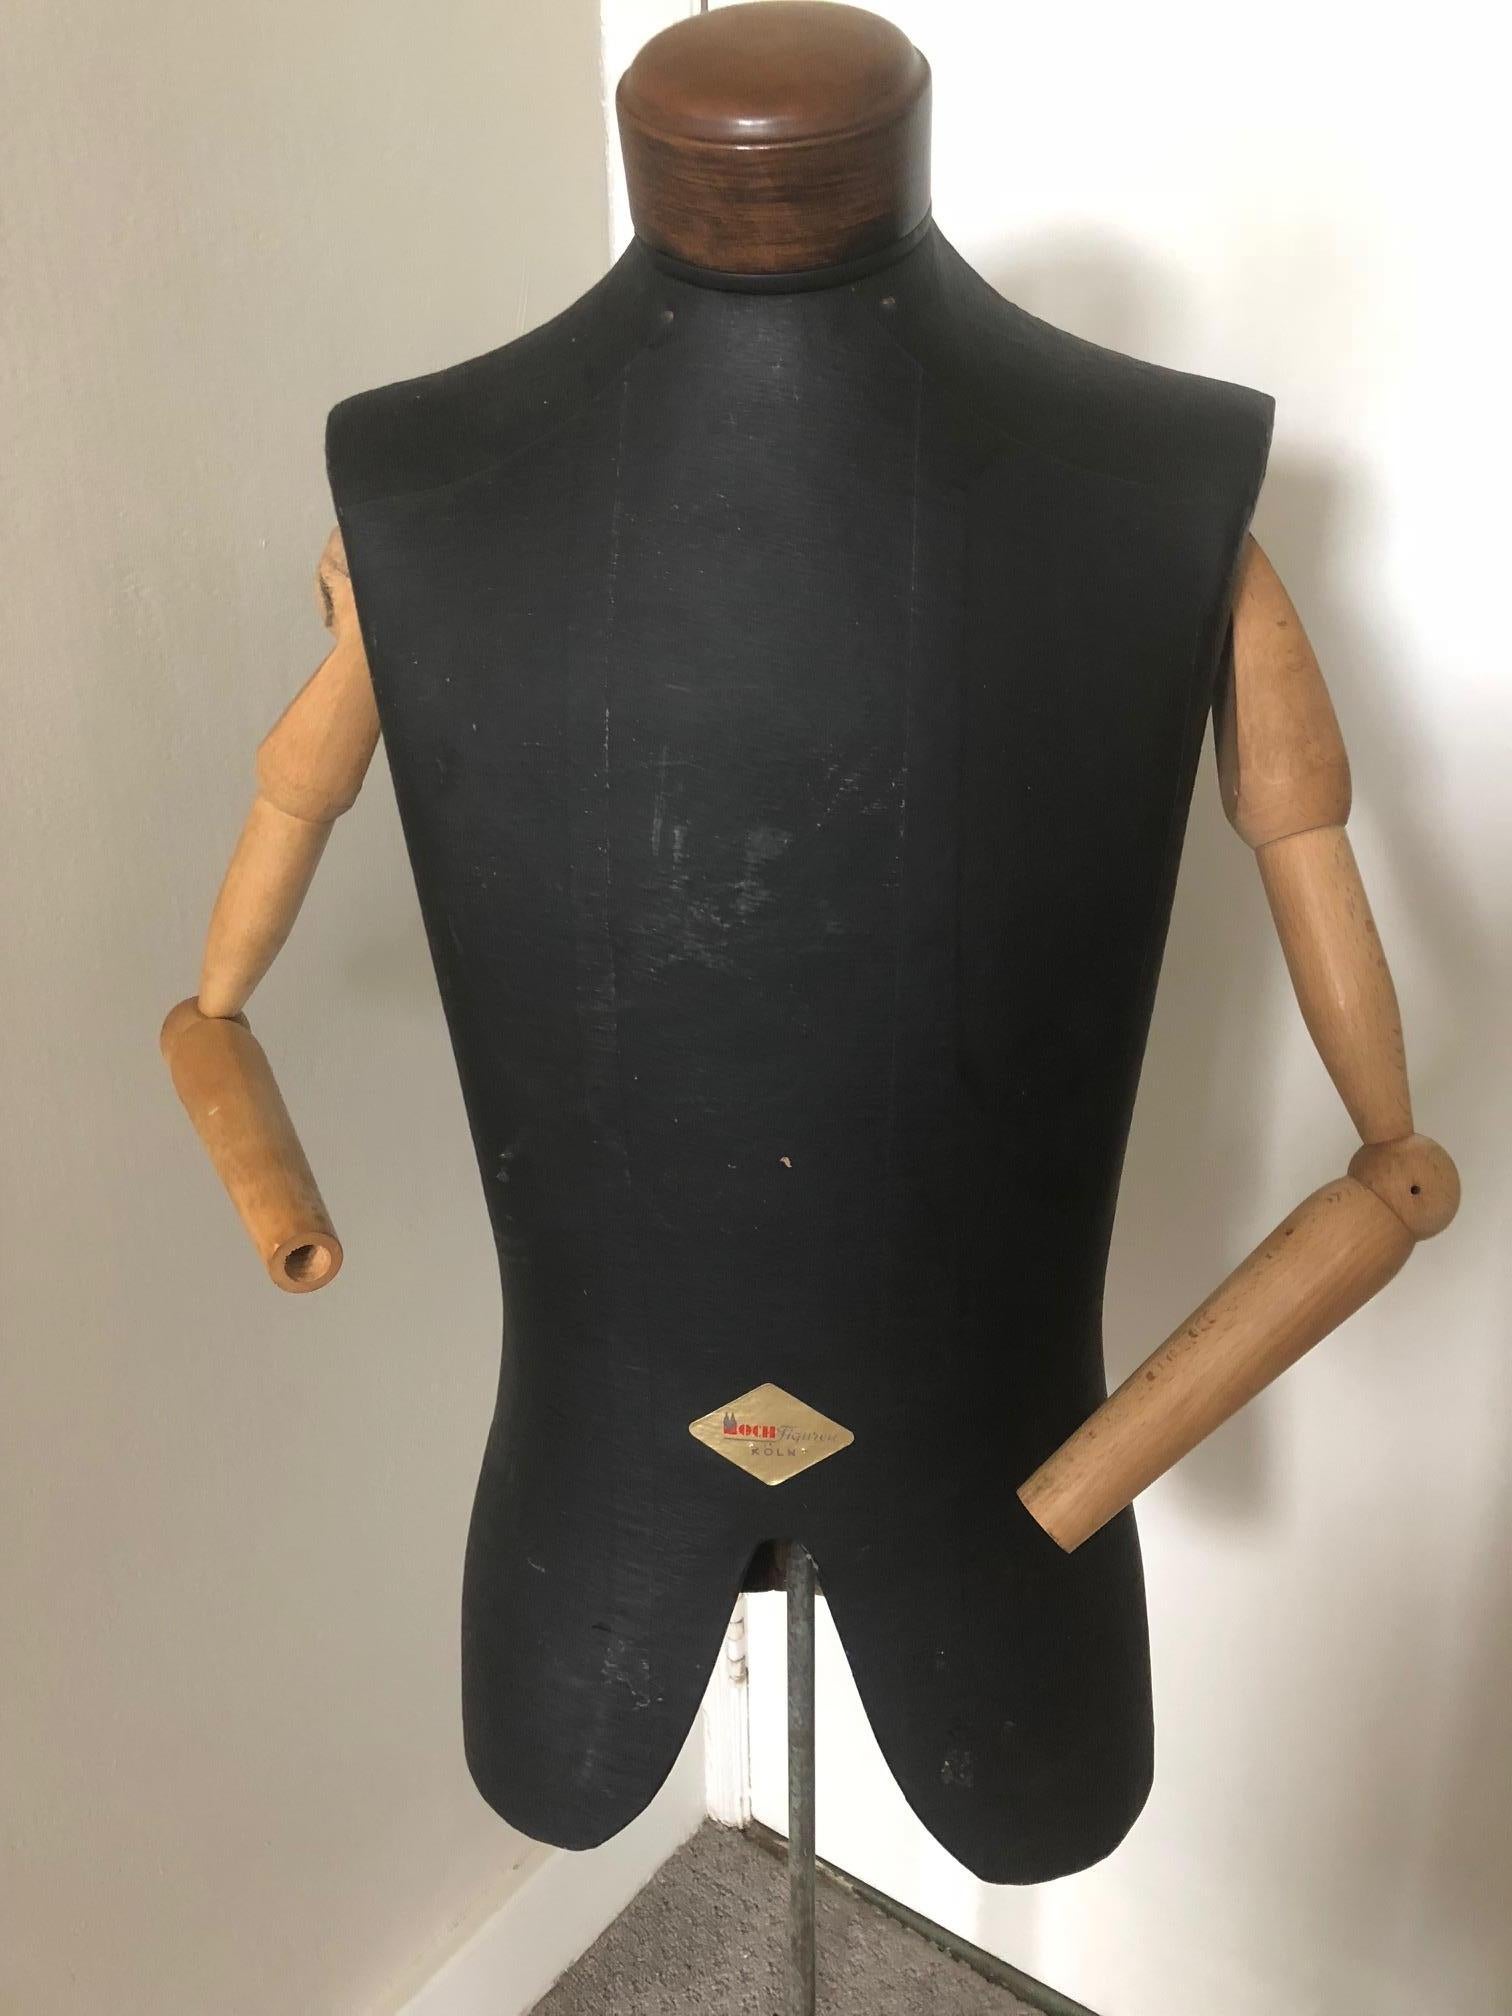 Male model, bust, mannequin, dress form with articulated arms. On original, adjustable ornate brass stand. By Moch Figuren of Koln, Germany, world's oldest mfg of mannequins. Acclaimed sculptors of the human form.

This male bust has articulated